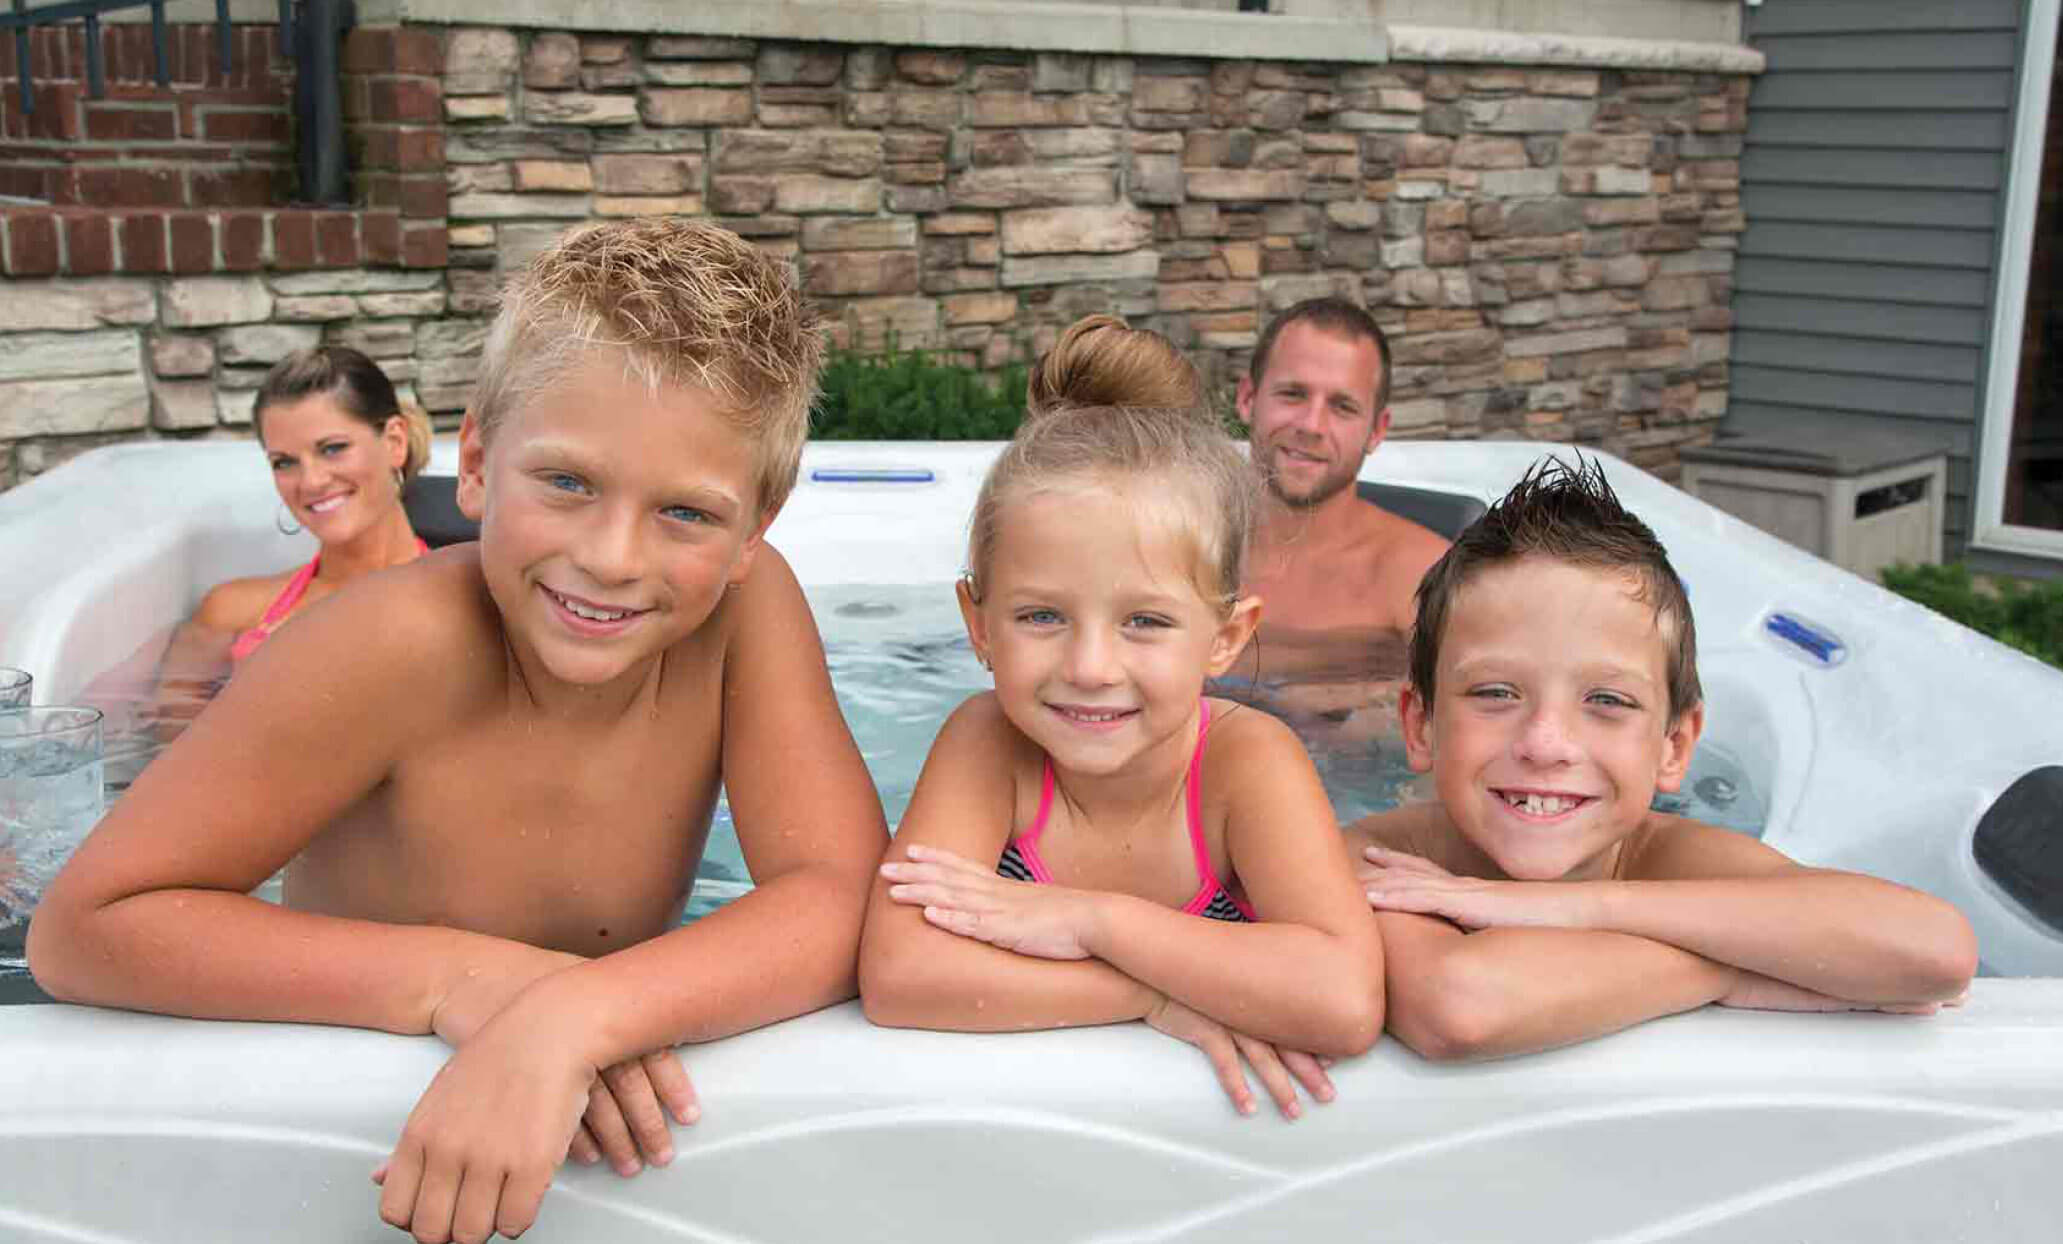 Intex Hot Tubs in Shop Hot Tubs by Brand 